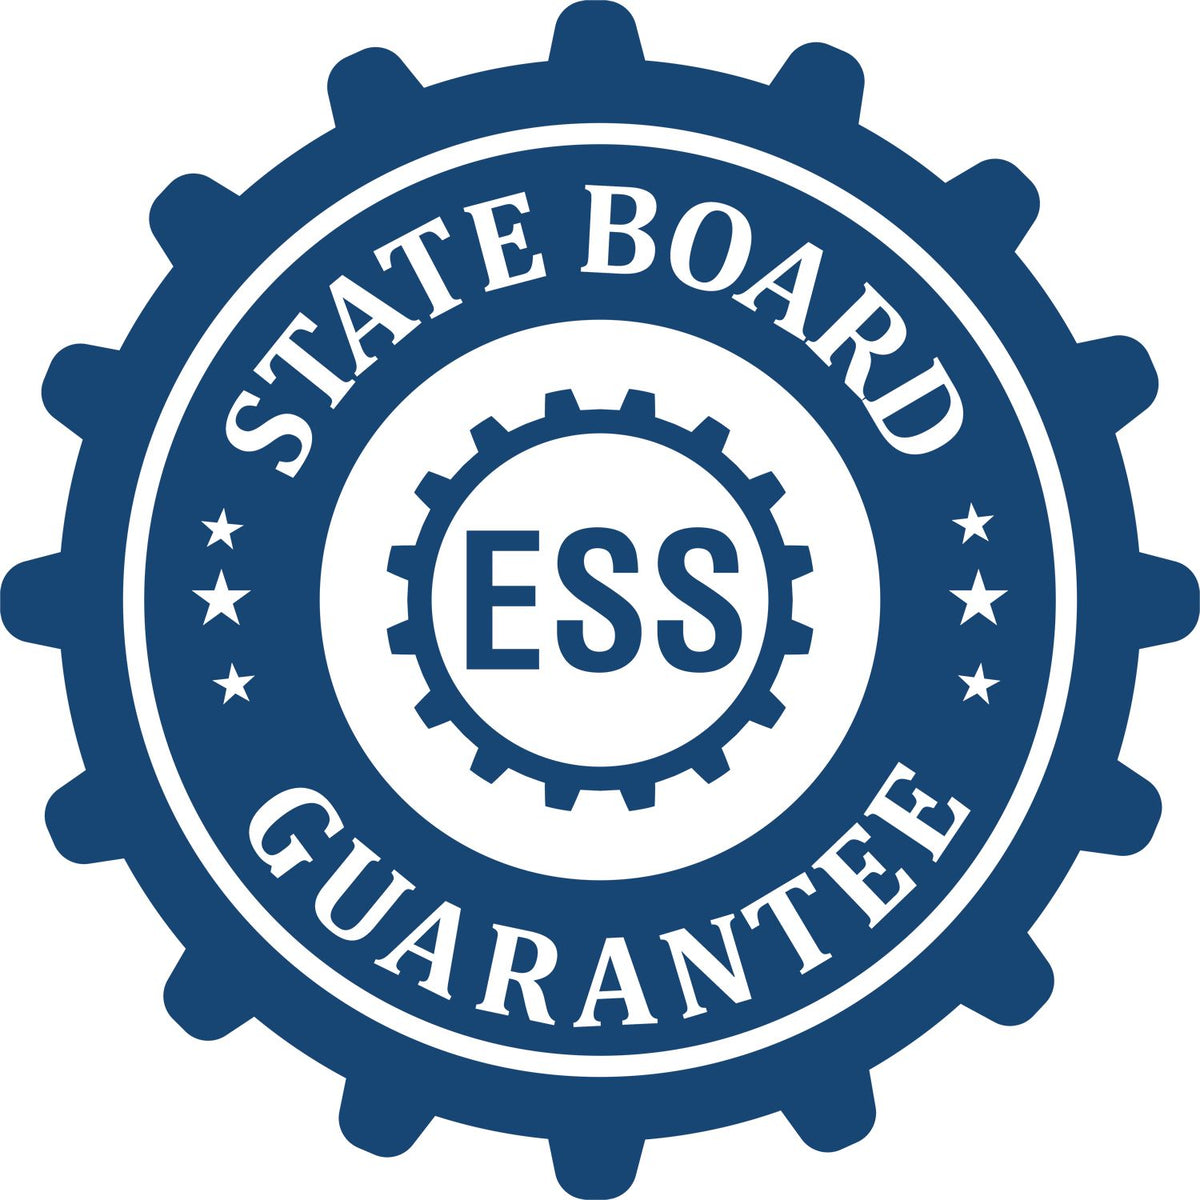 An emblem in a gear shape illustrating a state board guarantee for the State of Michigan Extended Long Reach Geologist Seal